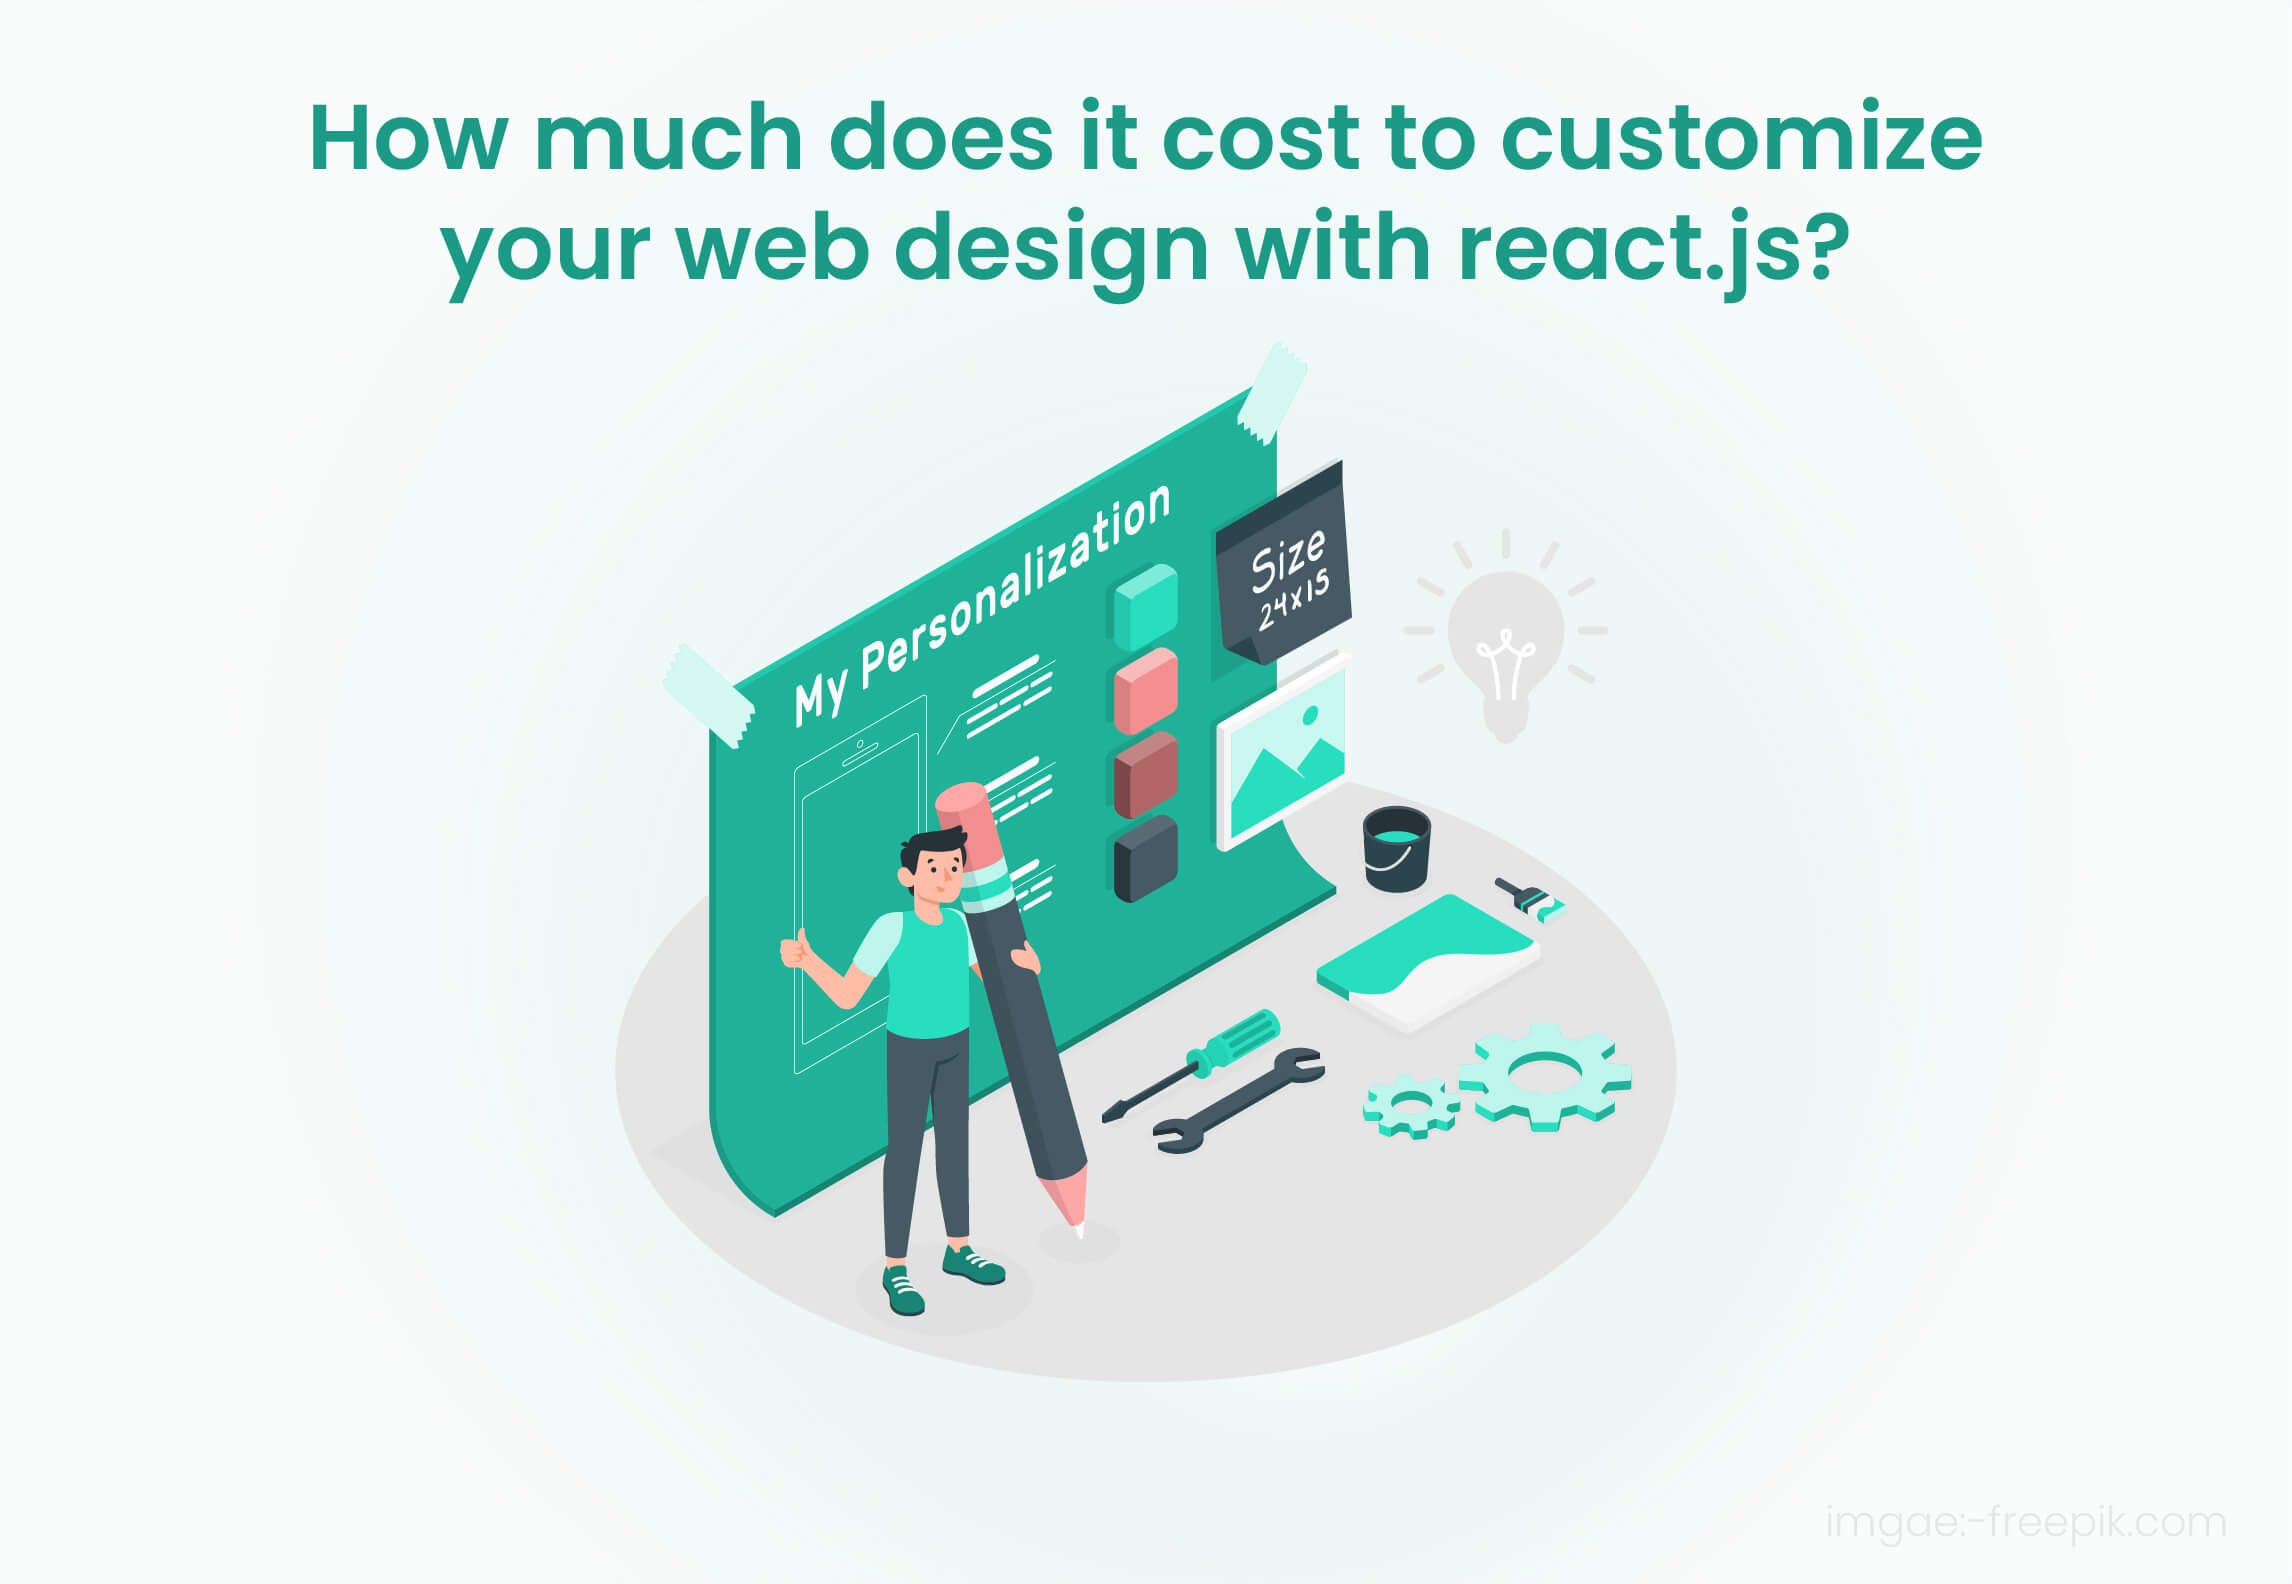 custom Web Design cost with react.js